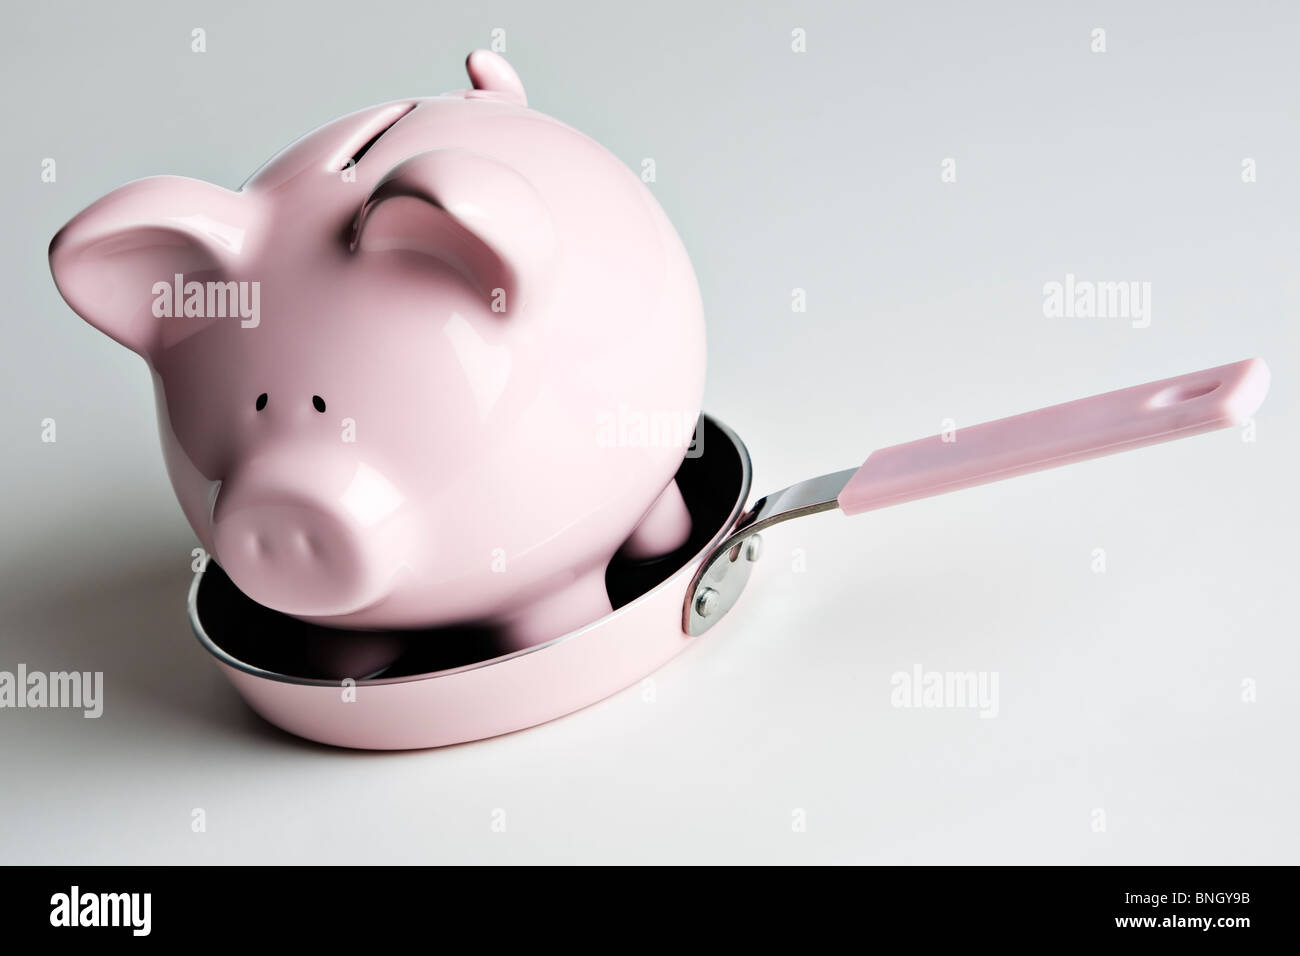 Pink piggy bank in a pink frying pan Stock Photo